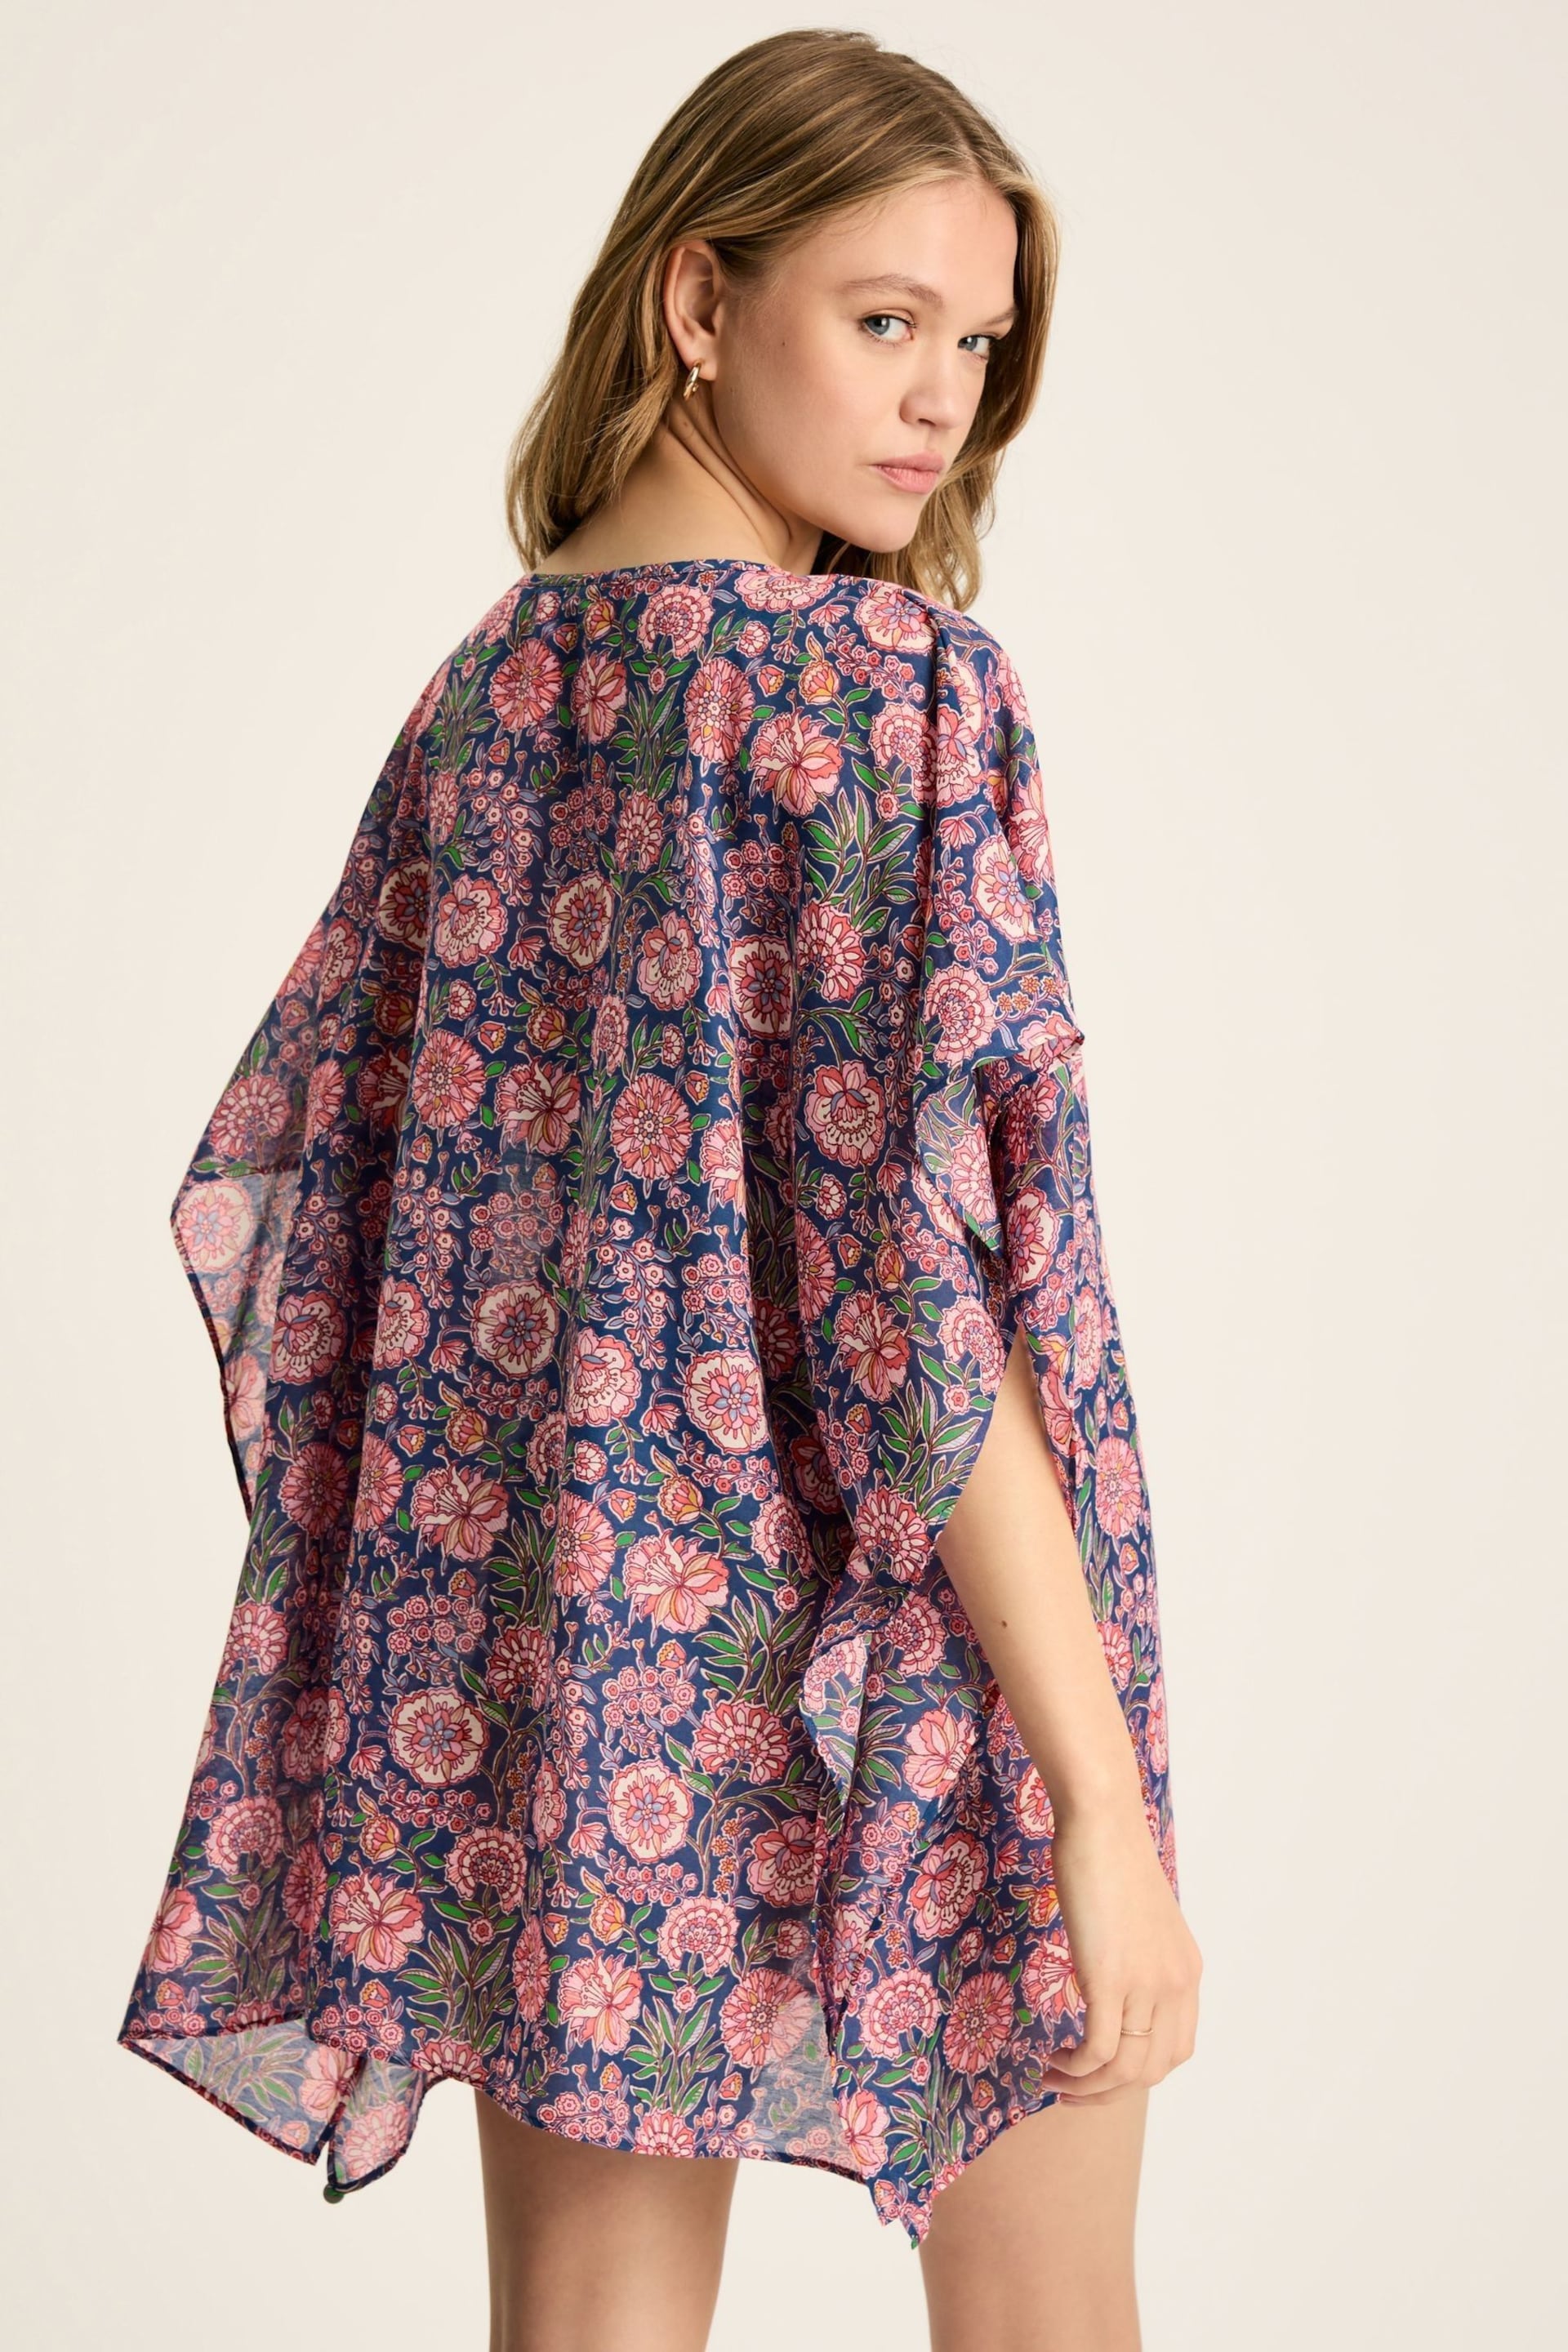 Joules Rosanna Navy & Pink Beach Cover-Up - Image 2 of 7